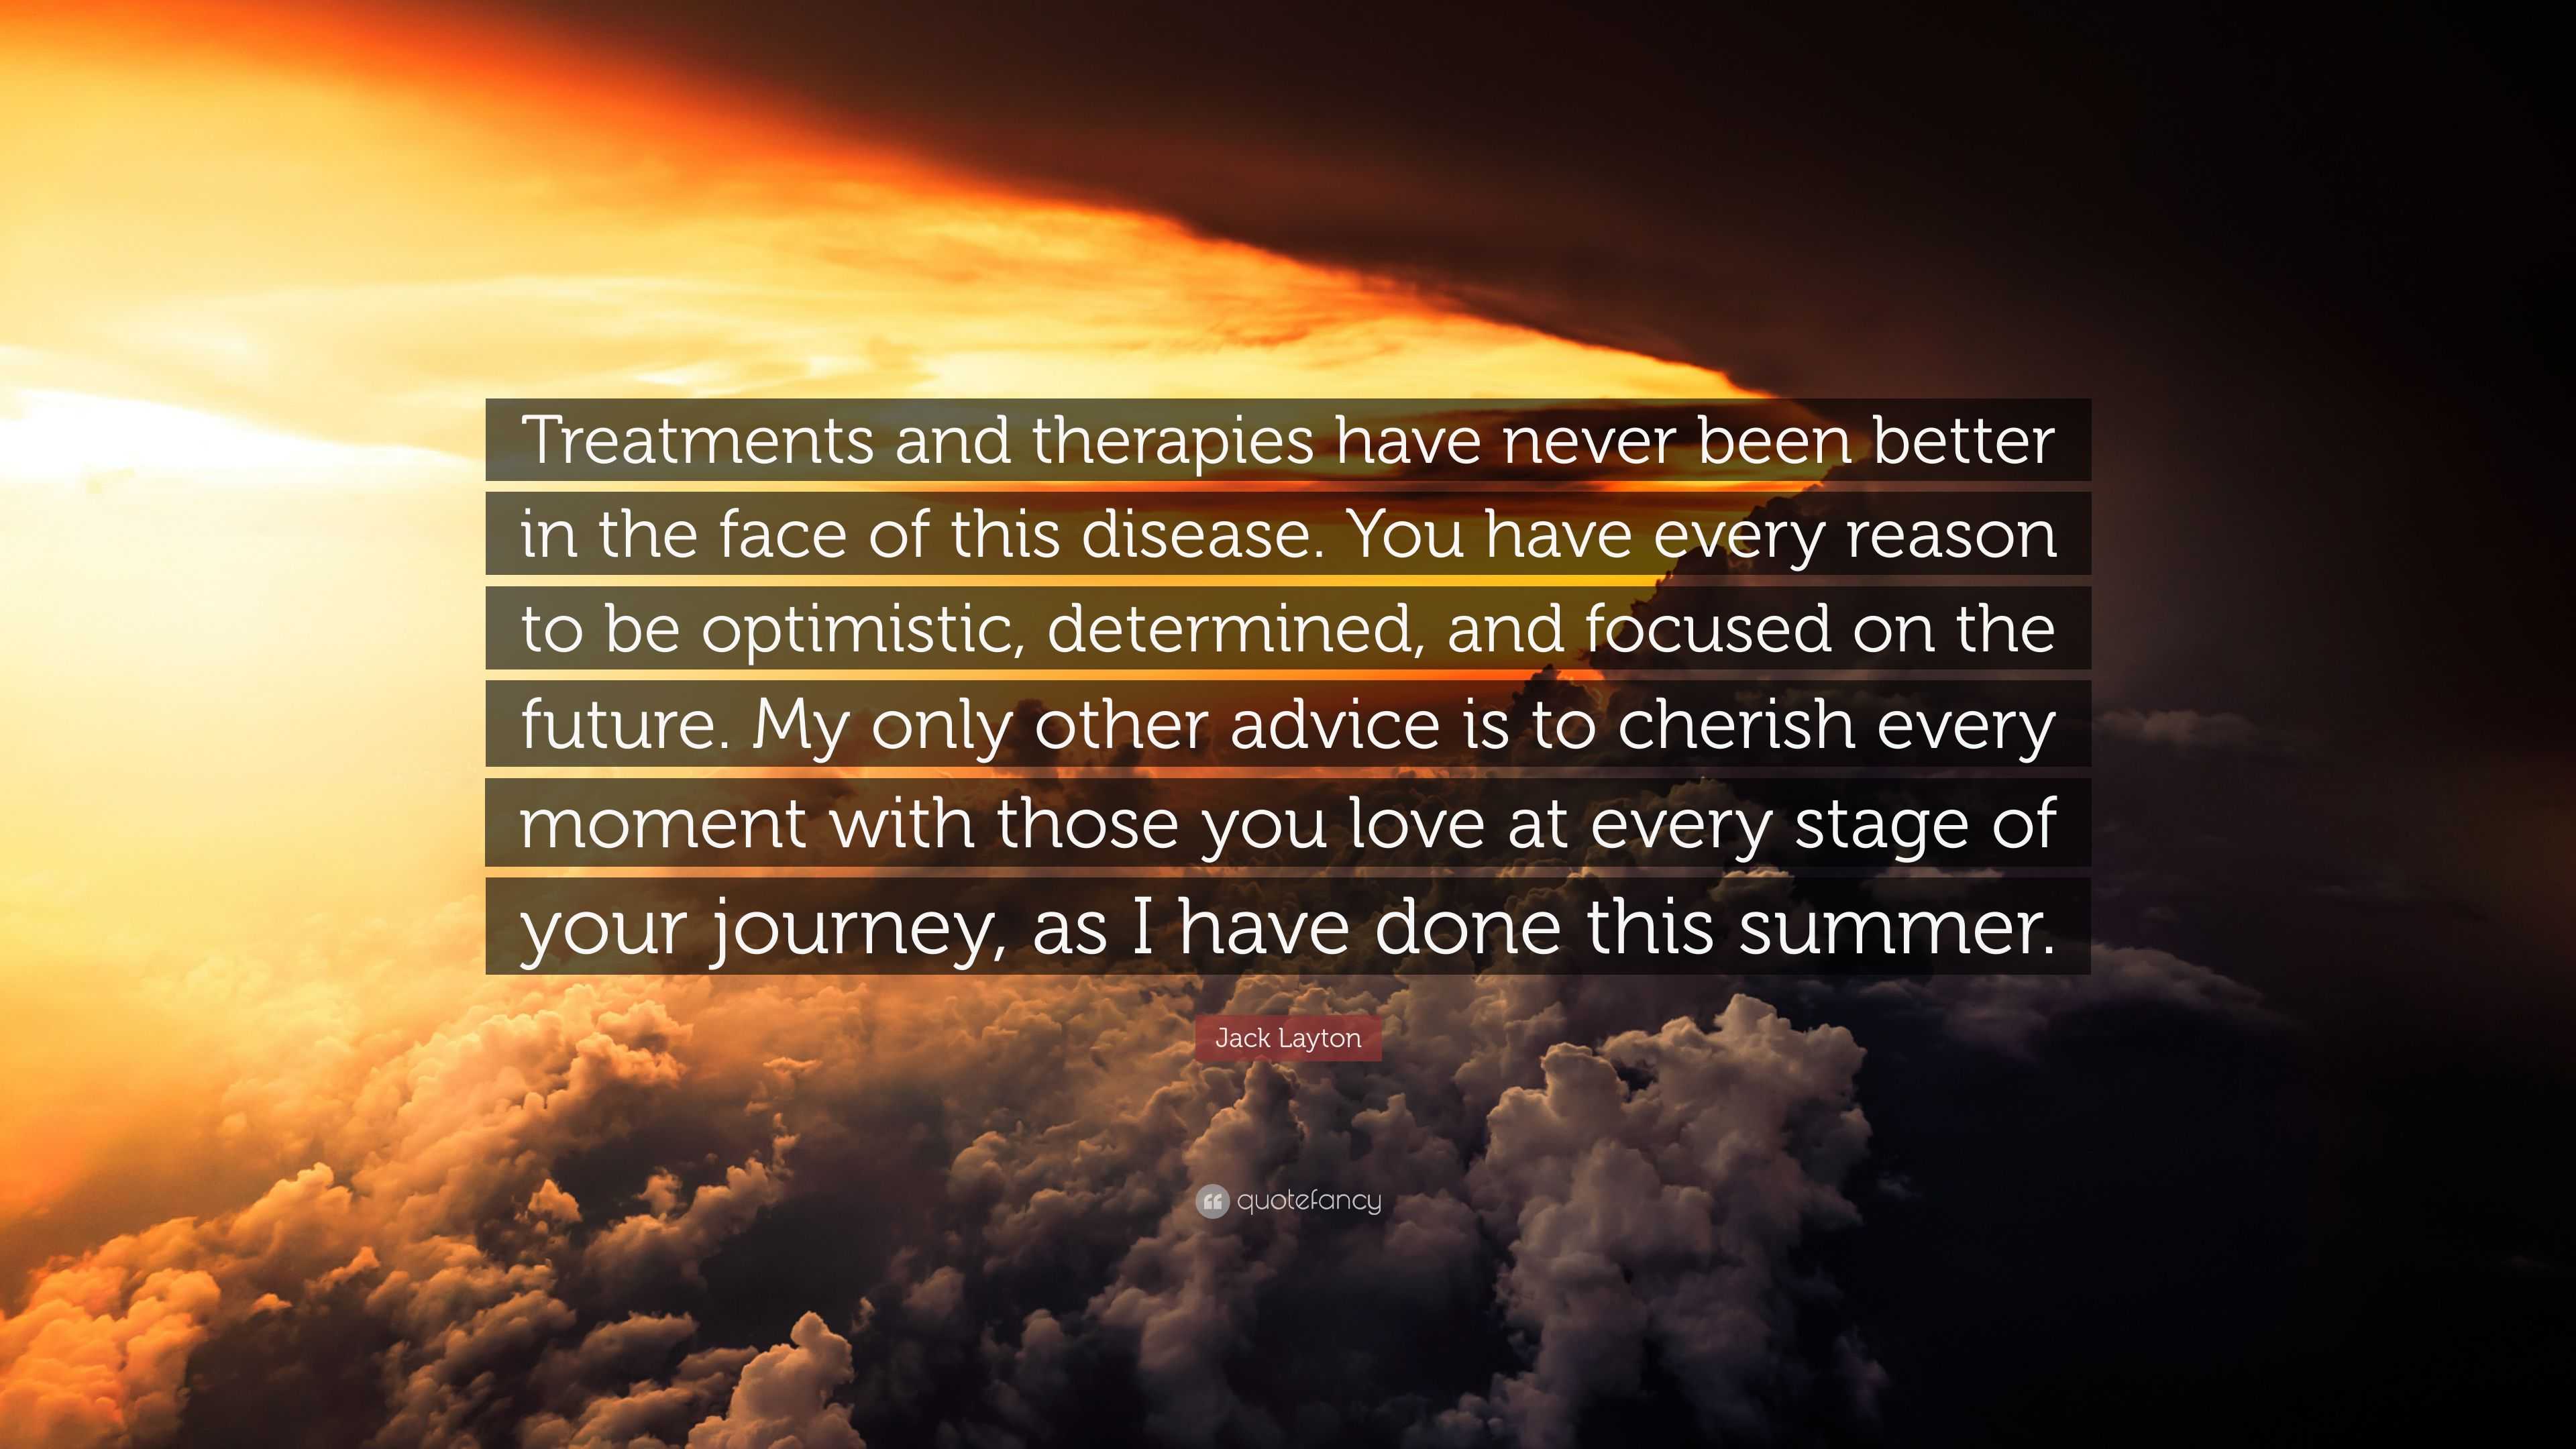 Jack Layton Quote: “Treatments and therapies have never been